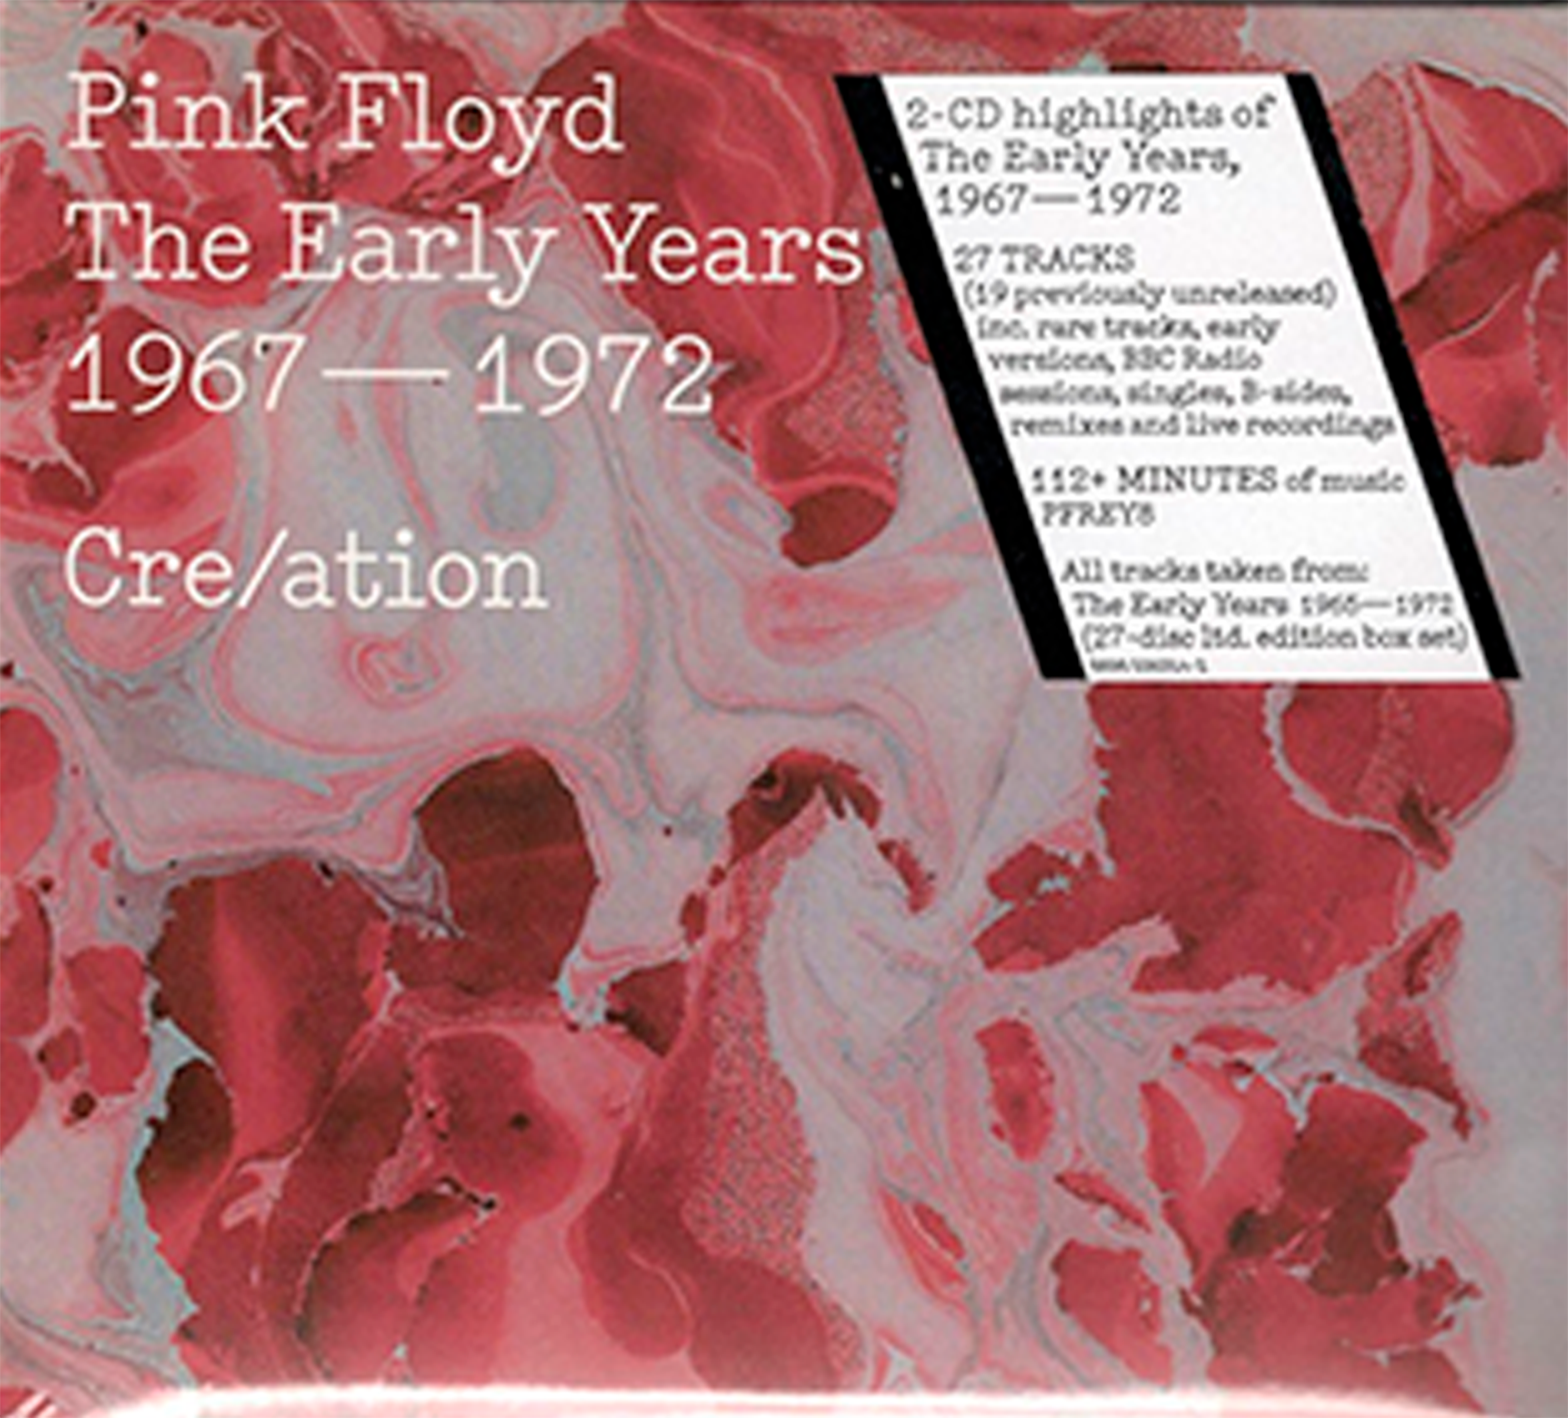 CDX2 P!nk Floyd - The Early Years 1967 - 1972. Cre/ation